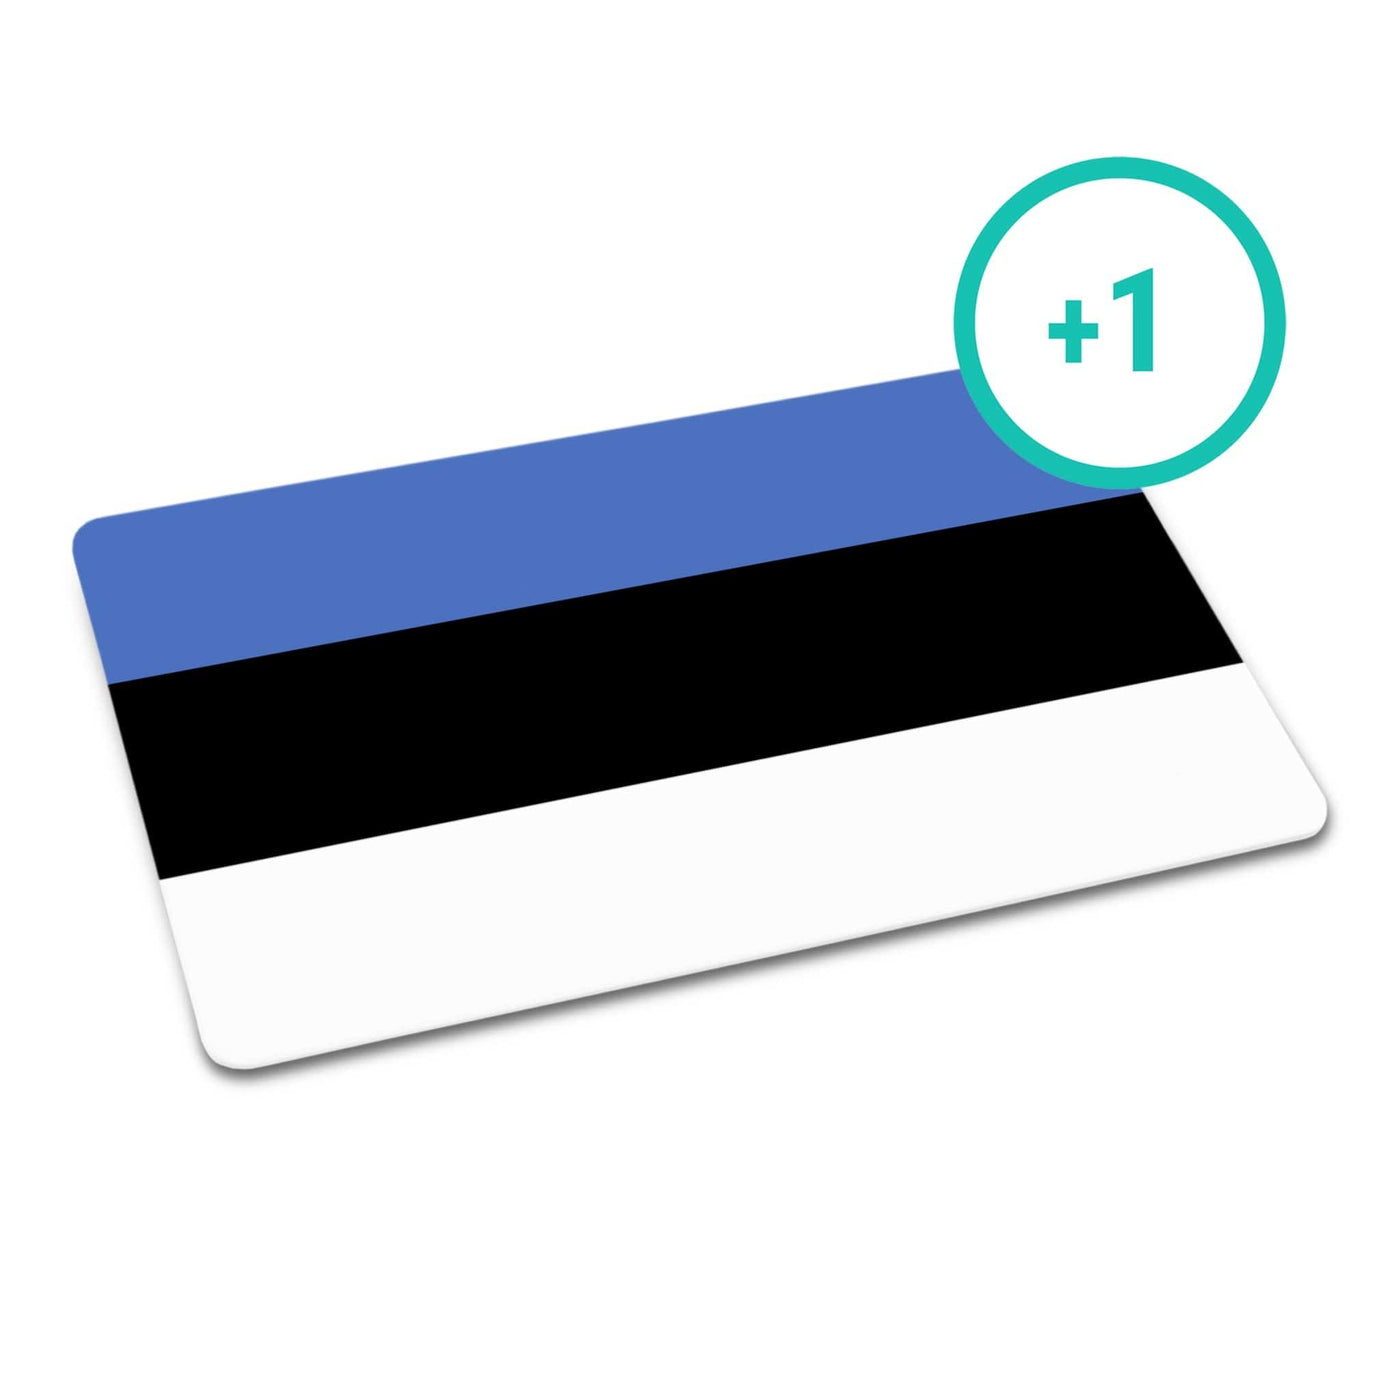 Additional Customized Card: Estonian (Leave in cart to purchase)